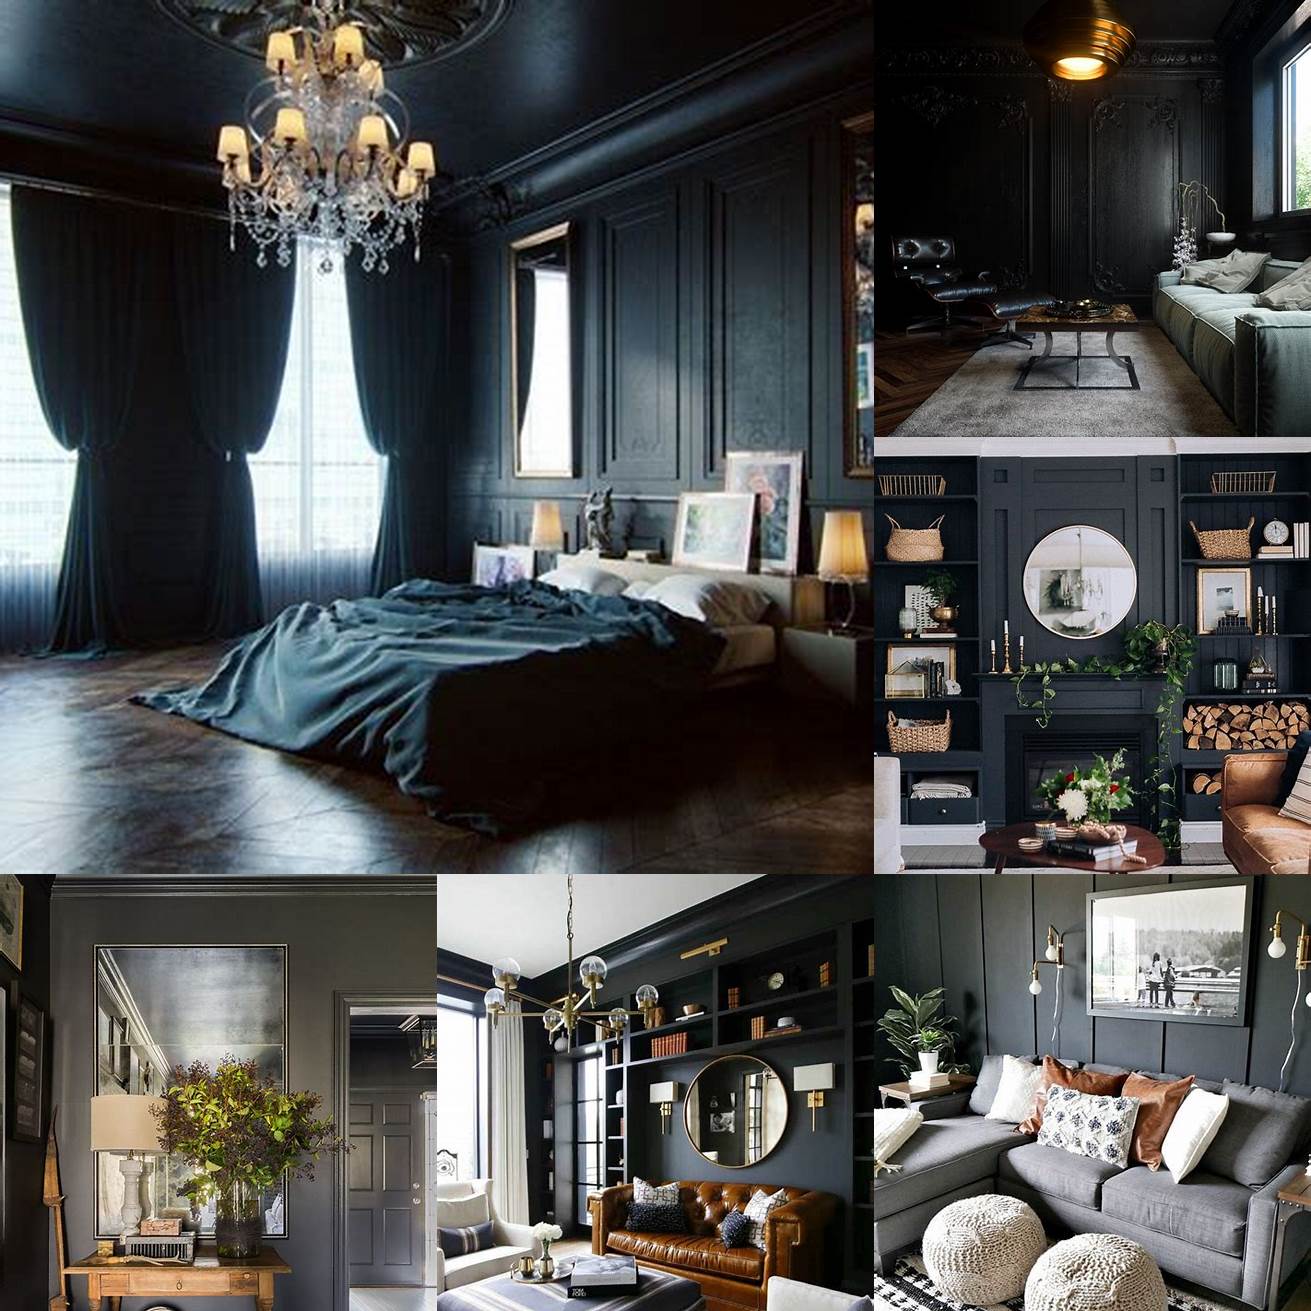 Dark and moody a bold and dramatic look thats perfect for those who want to make a statement